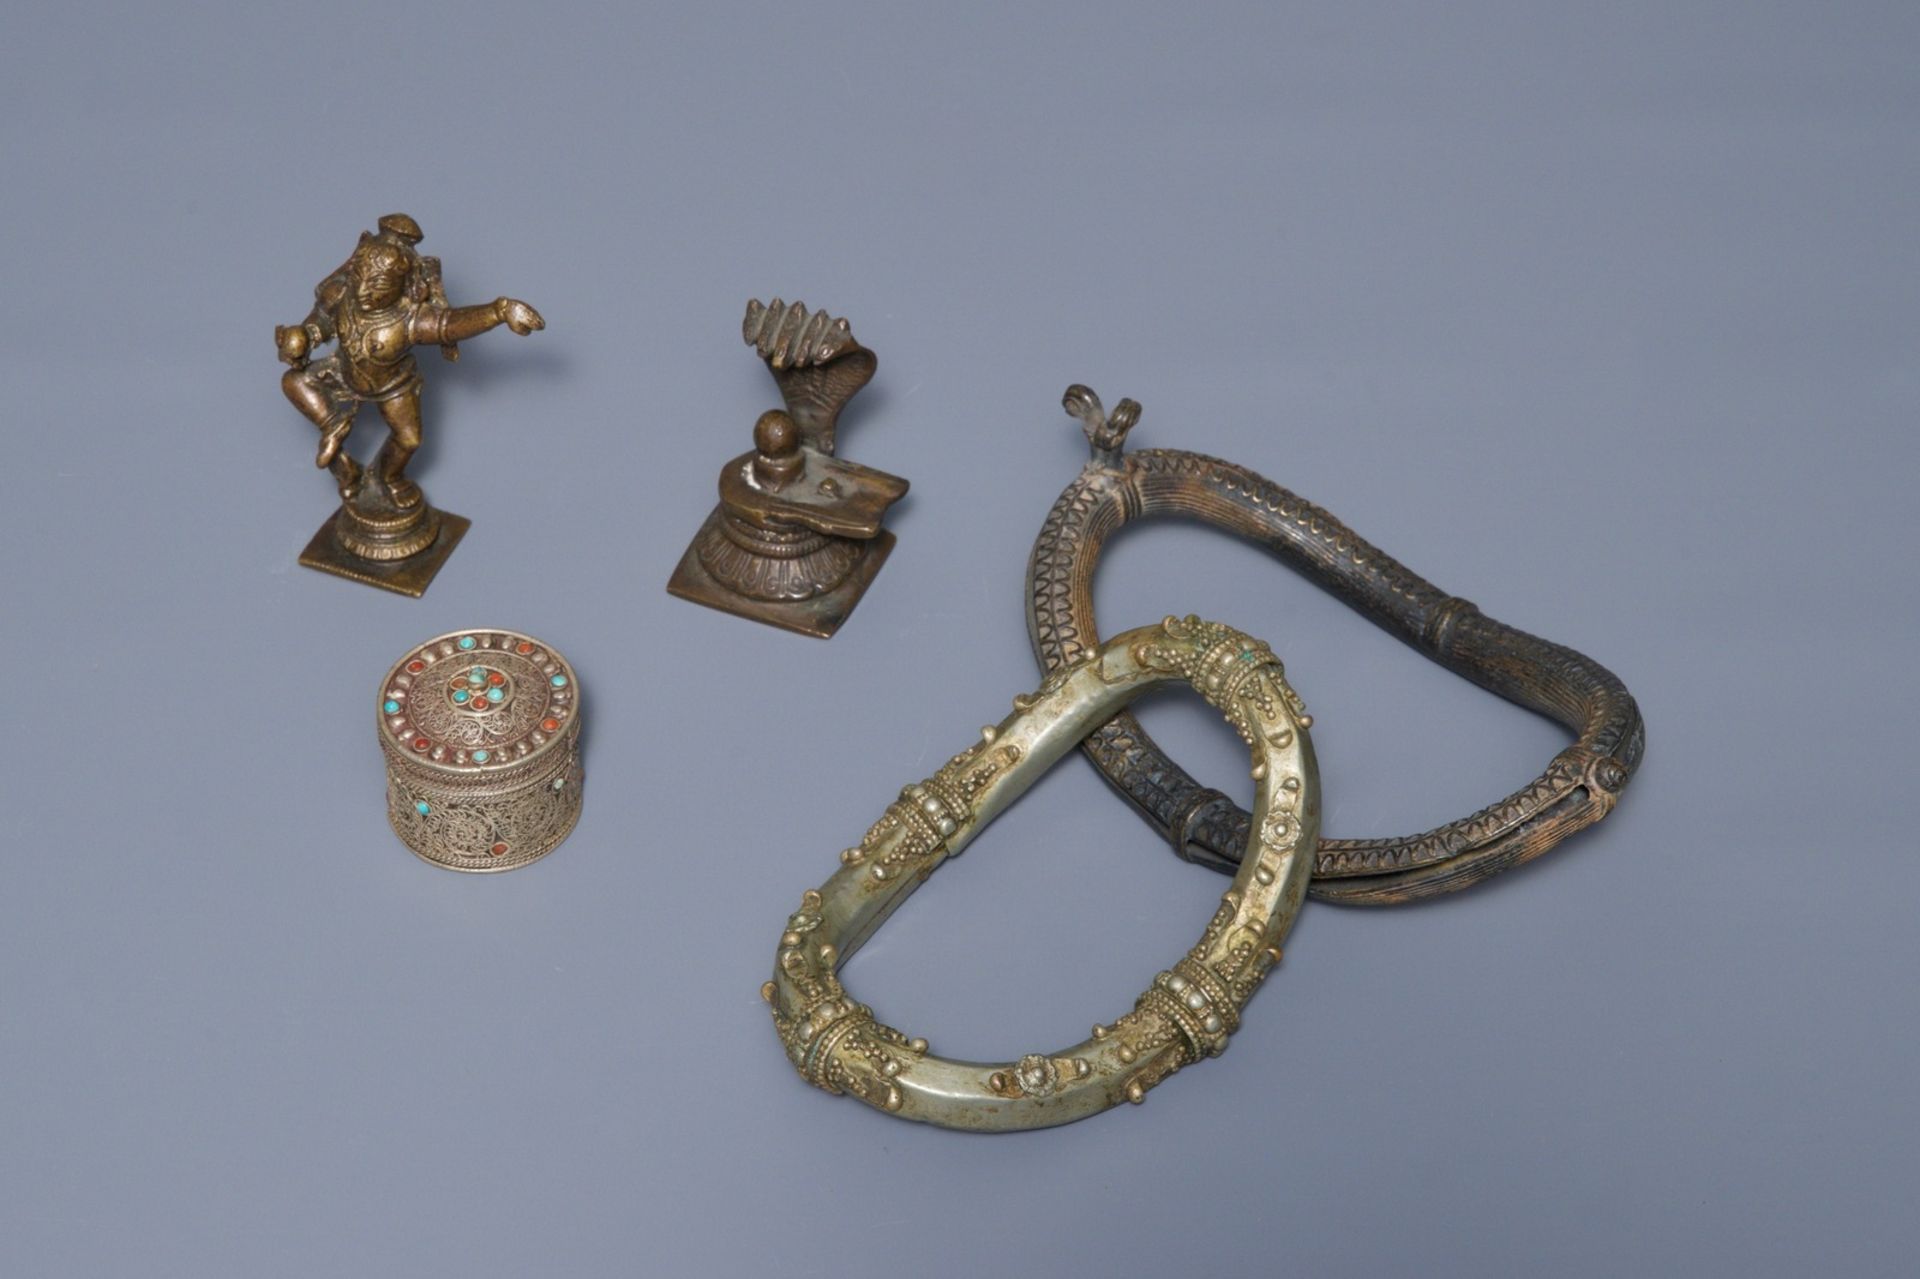 A group of silver and bronze statues and utensils, India, 18/19th C. - Image 3 of 4